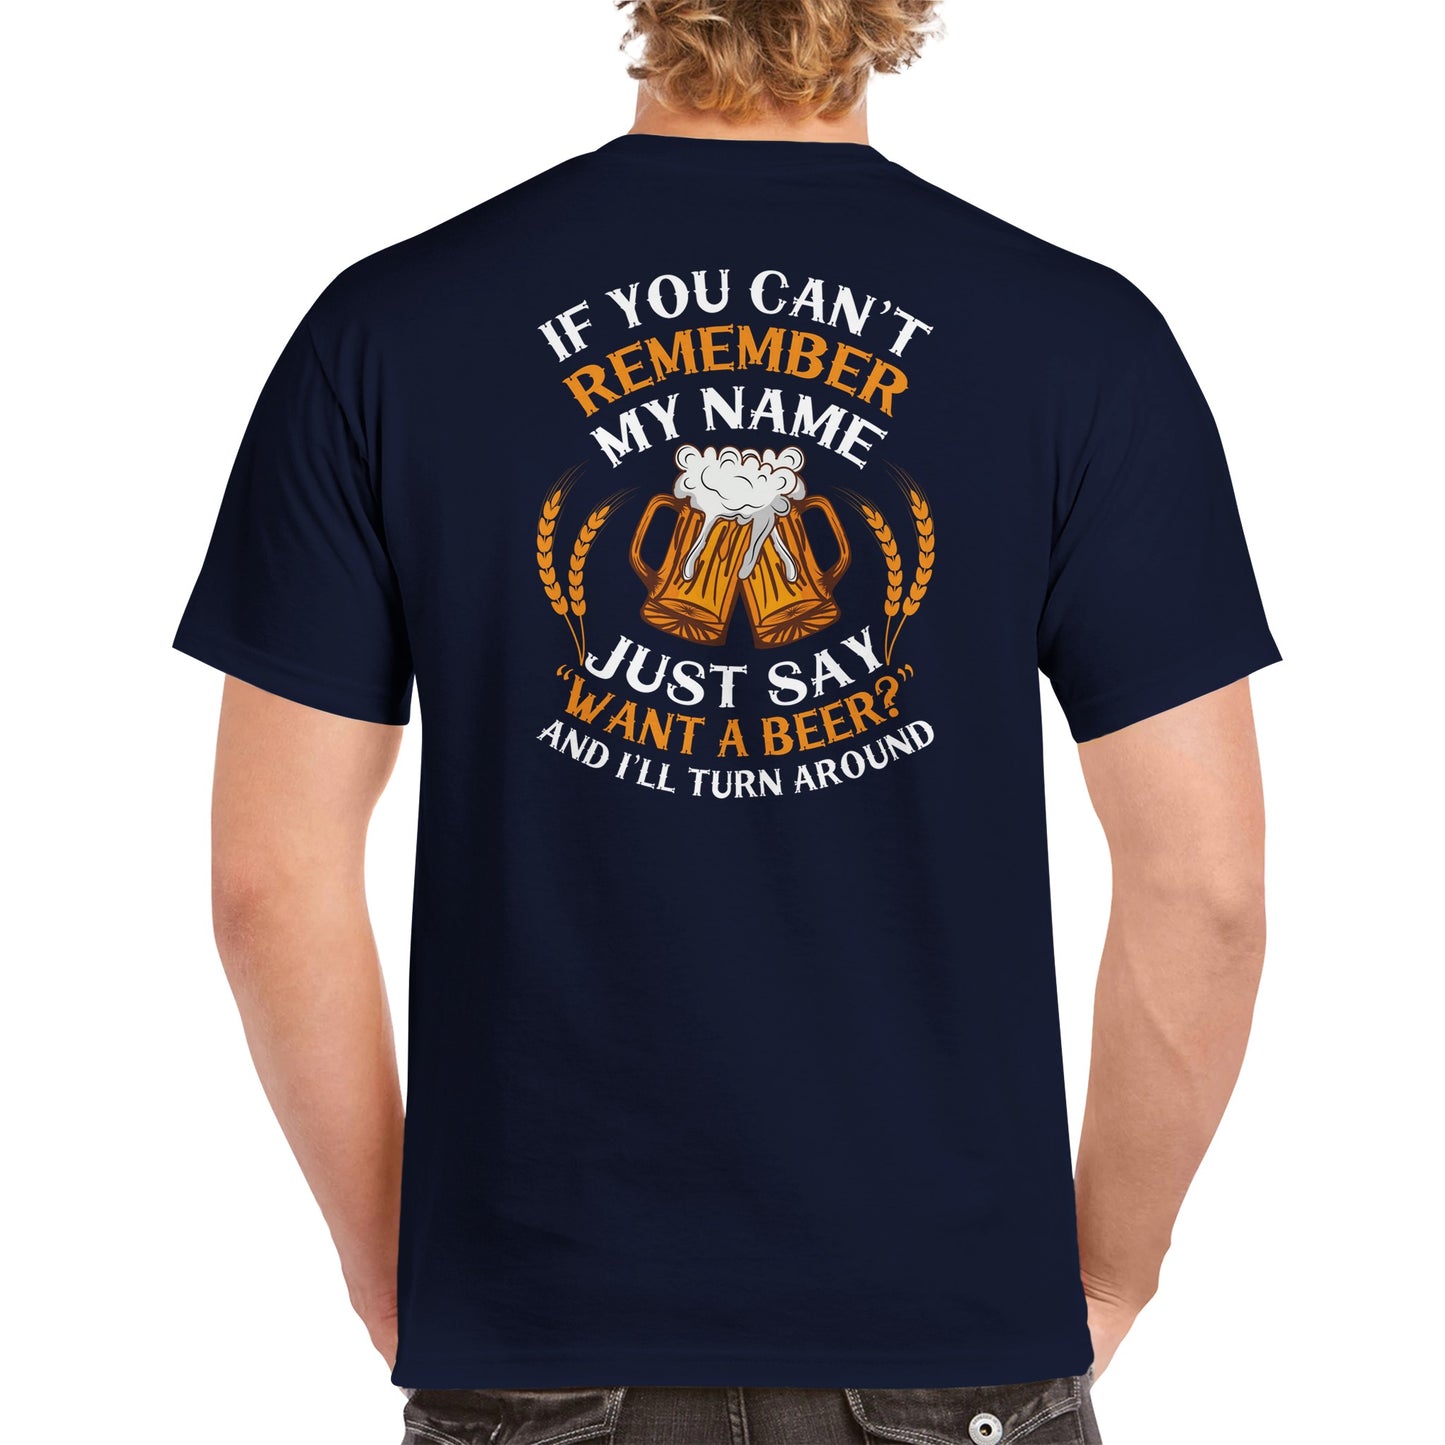 "If you can't remember my name" T-shirt